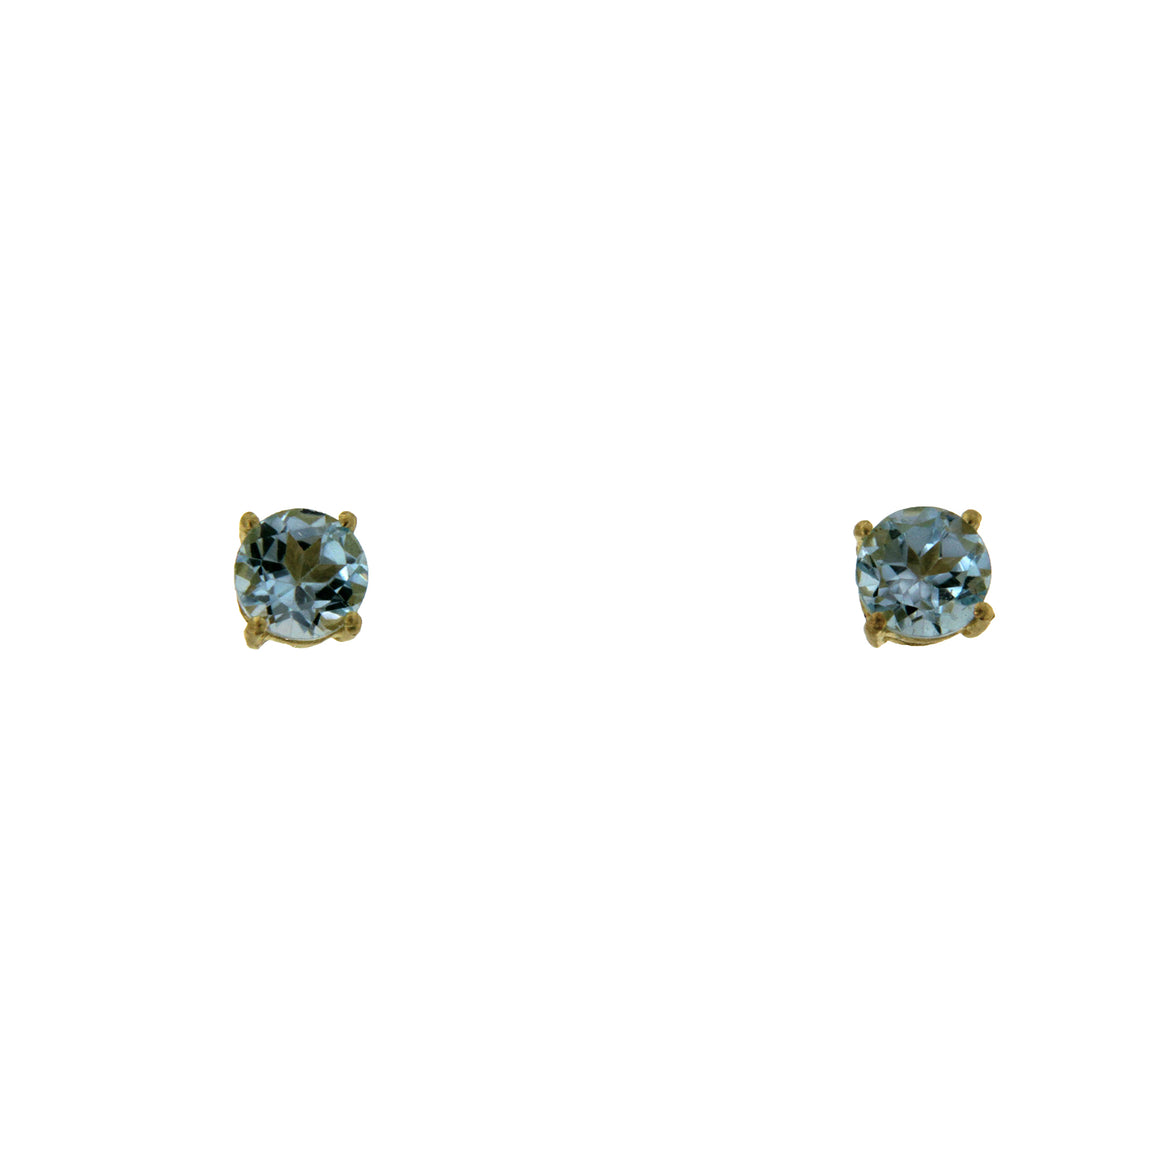 Faceted Blue Topaz studs in a prong setting. Set in 22 carat Vermeil over Sterling Silver. Perfect for everyday wear.